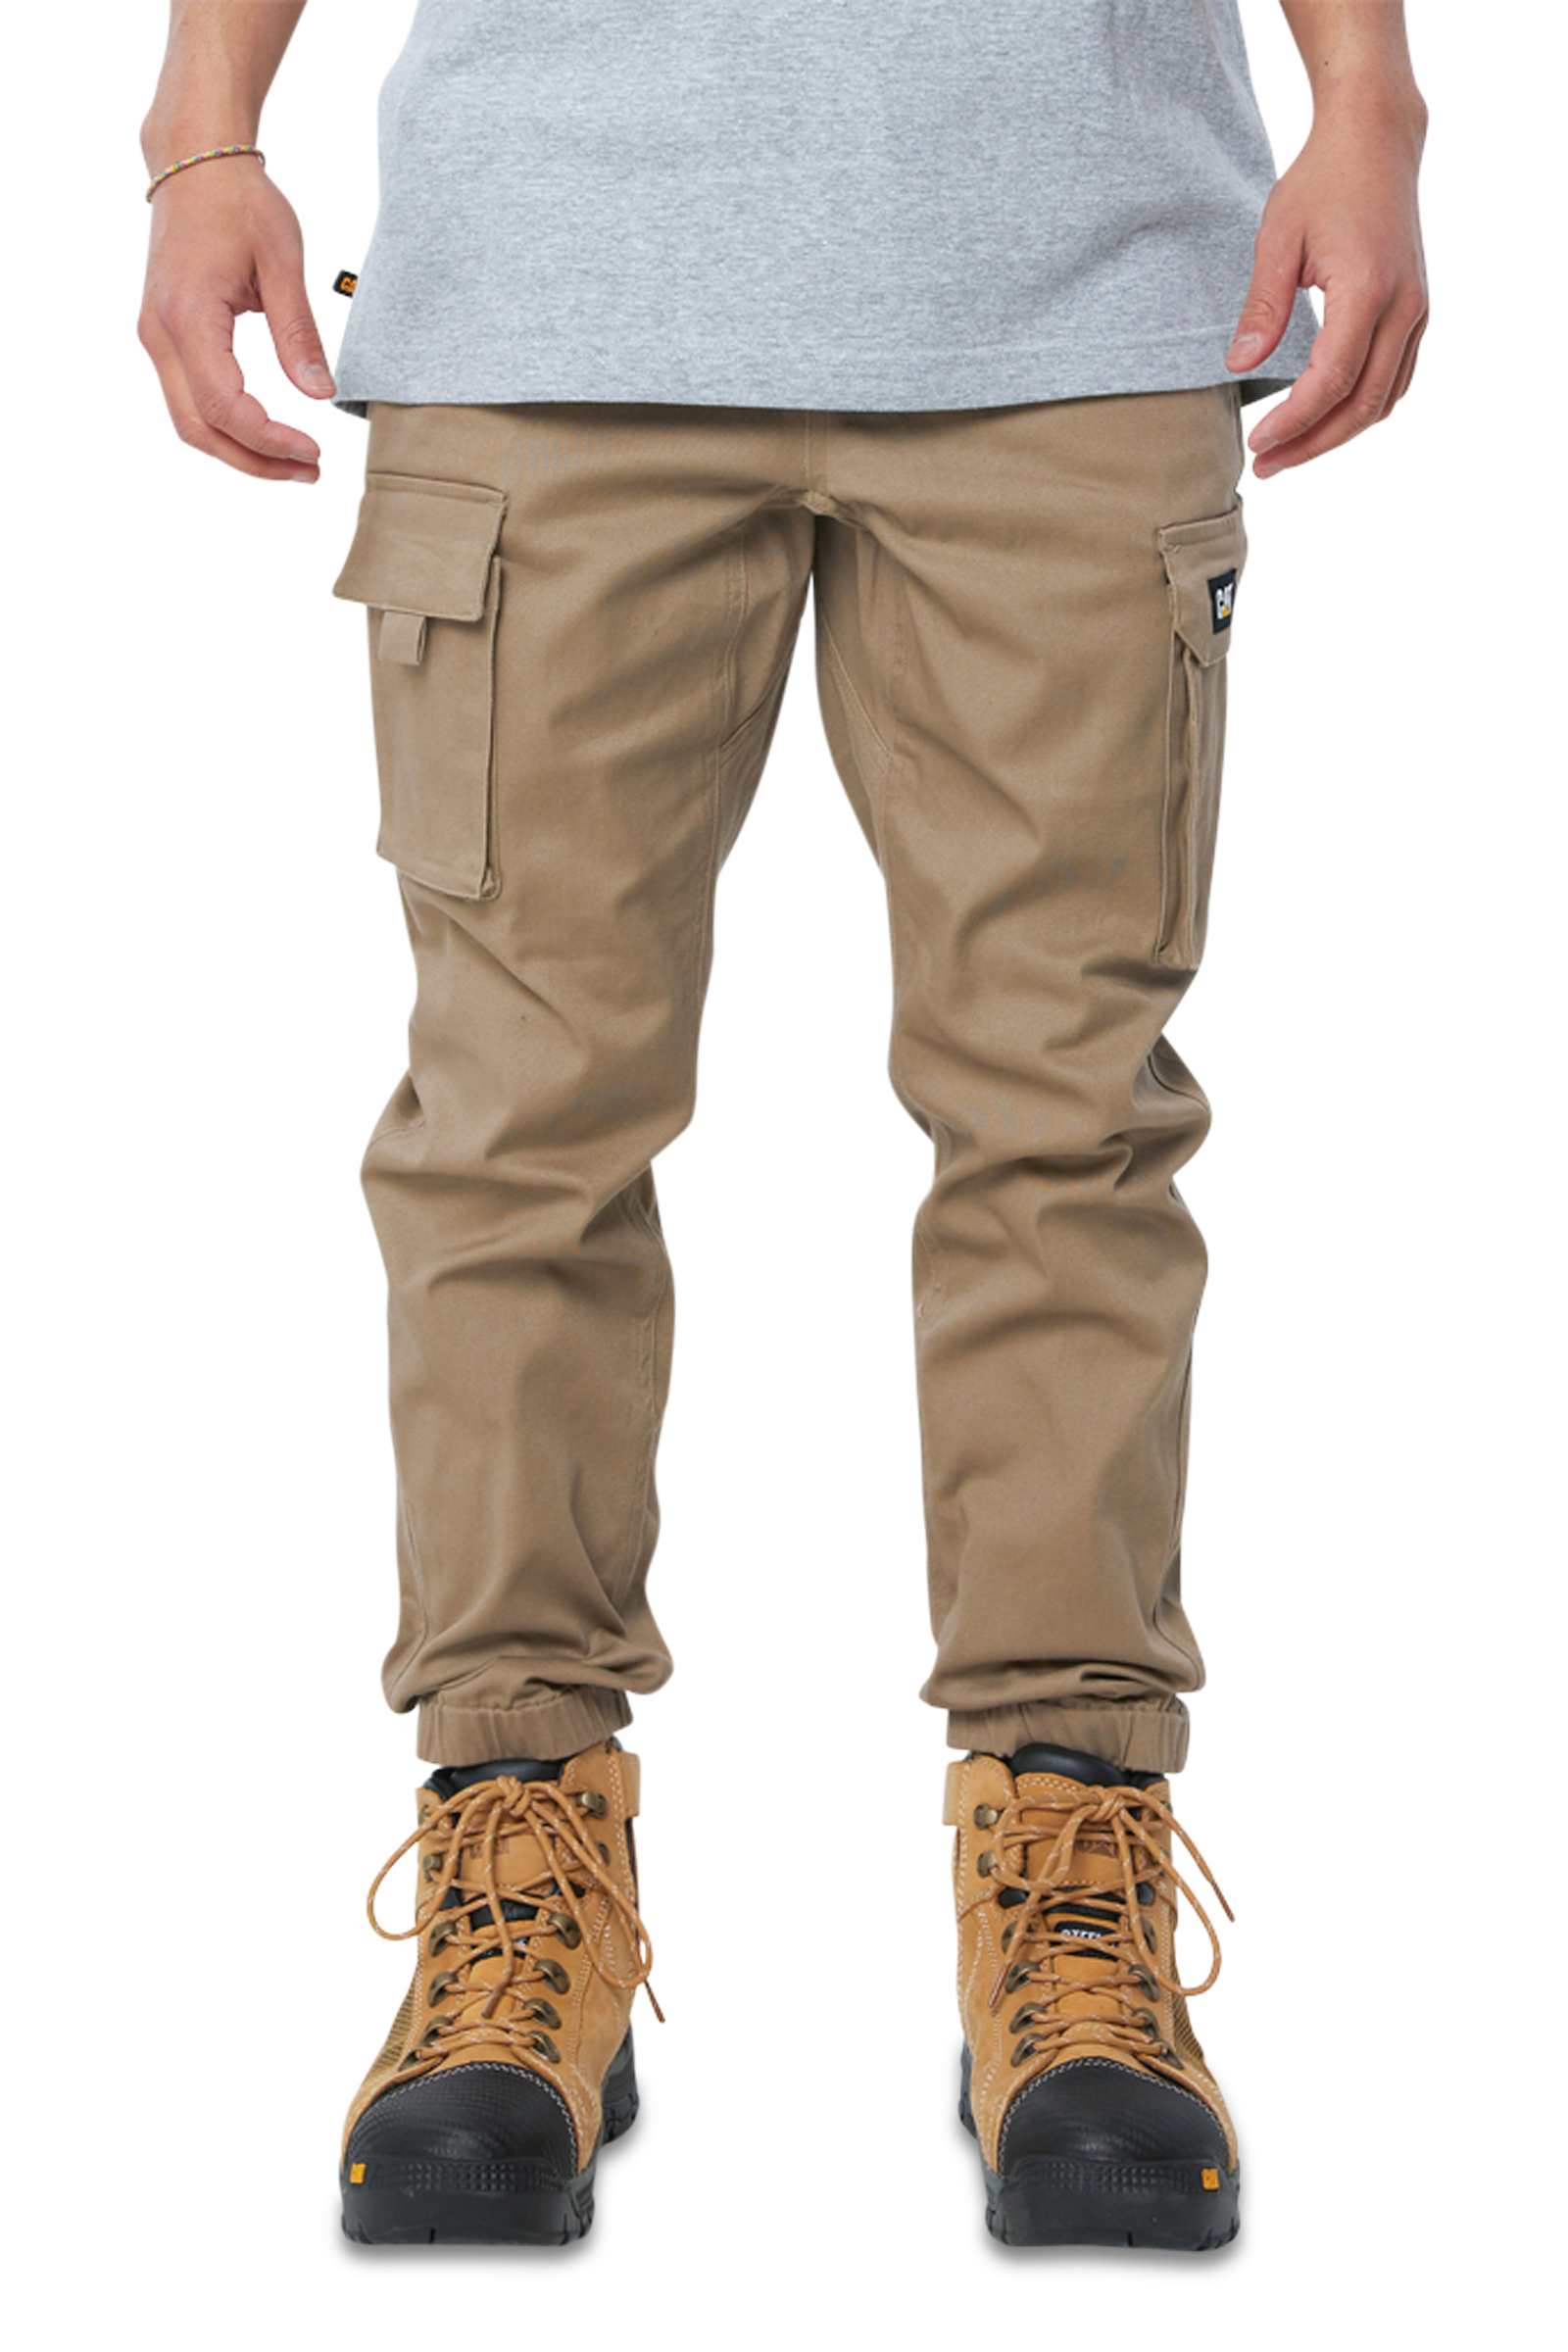 REPLAY PANTS - The Ghetto , Home of Diesel, Vialli, G-Star RAW and Many  More Top Premium Brands